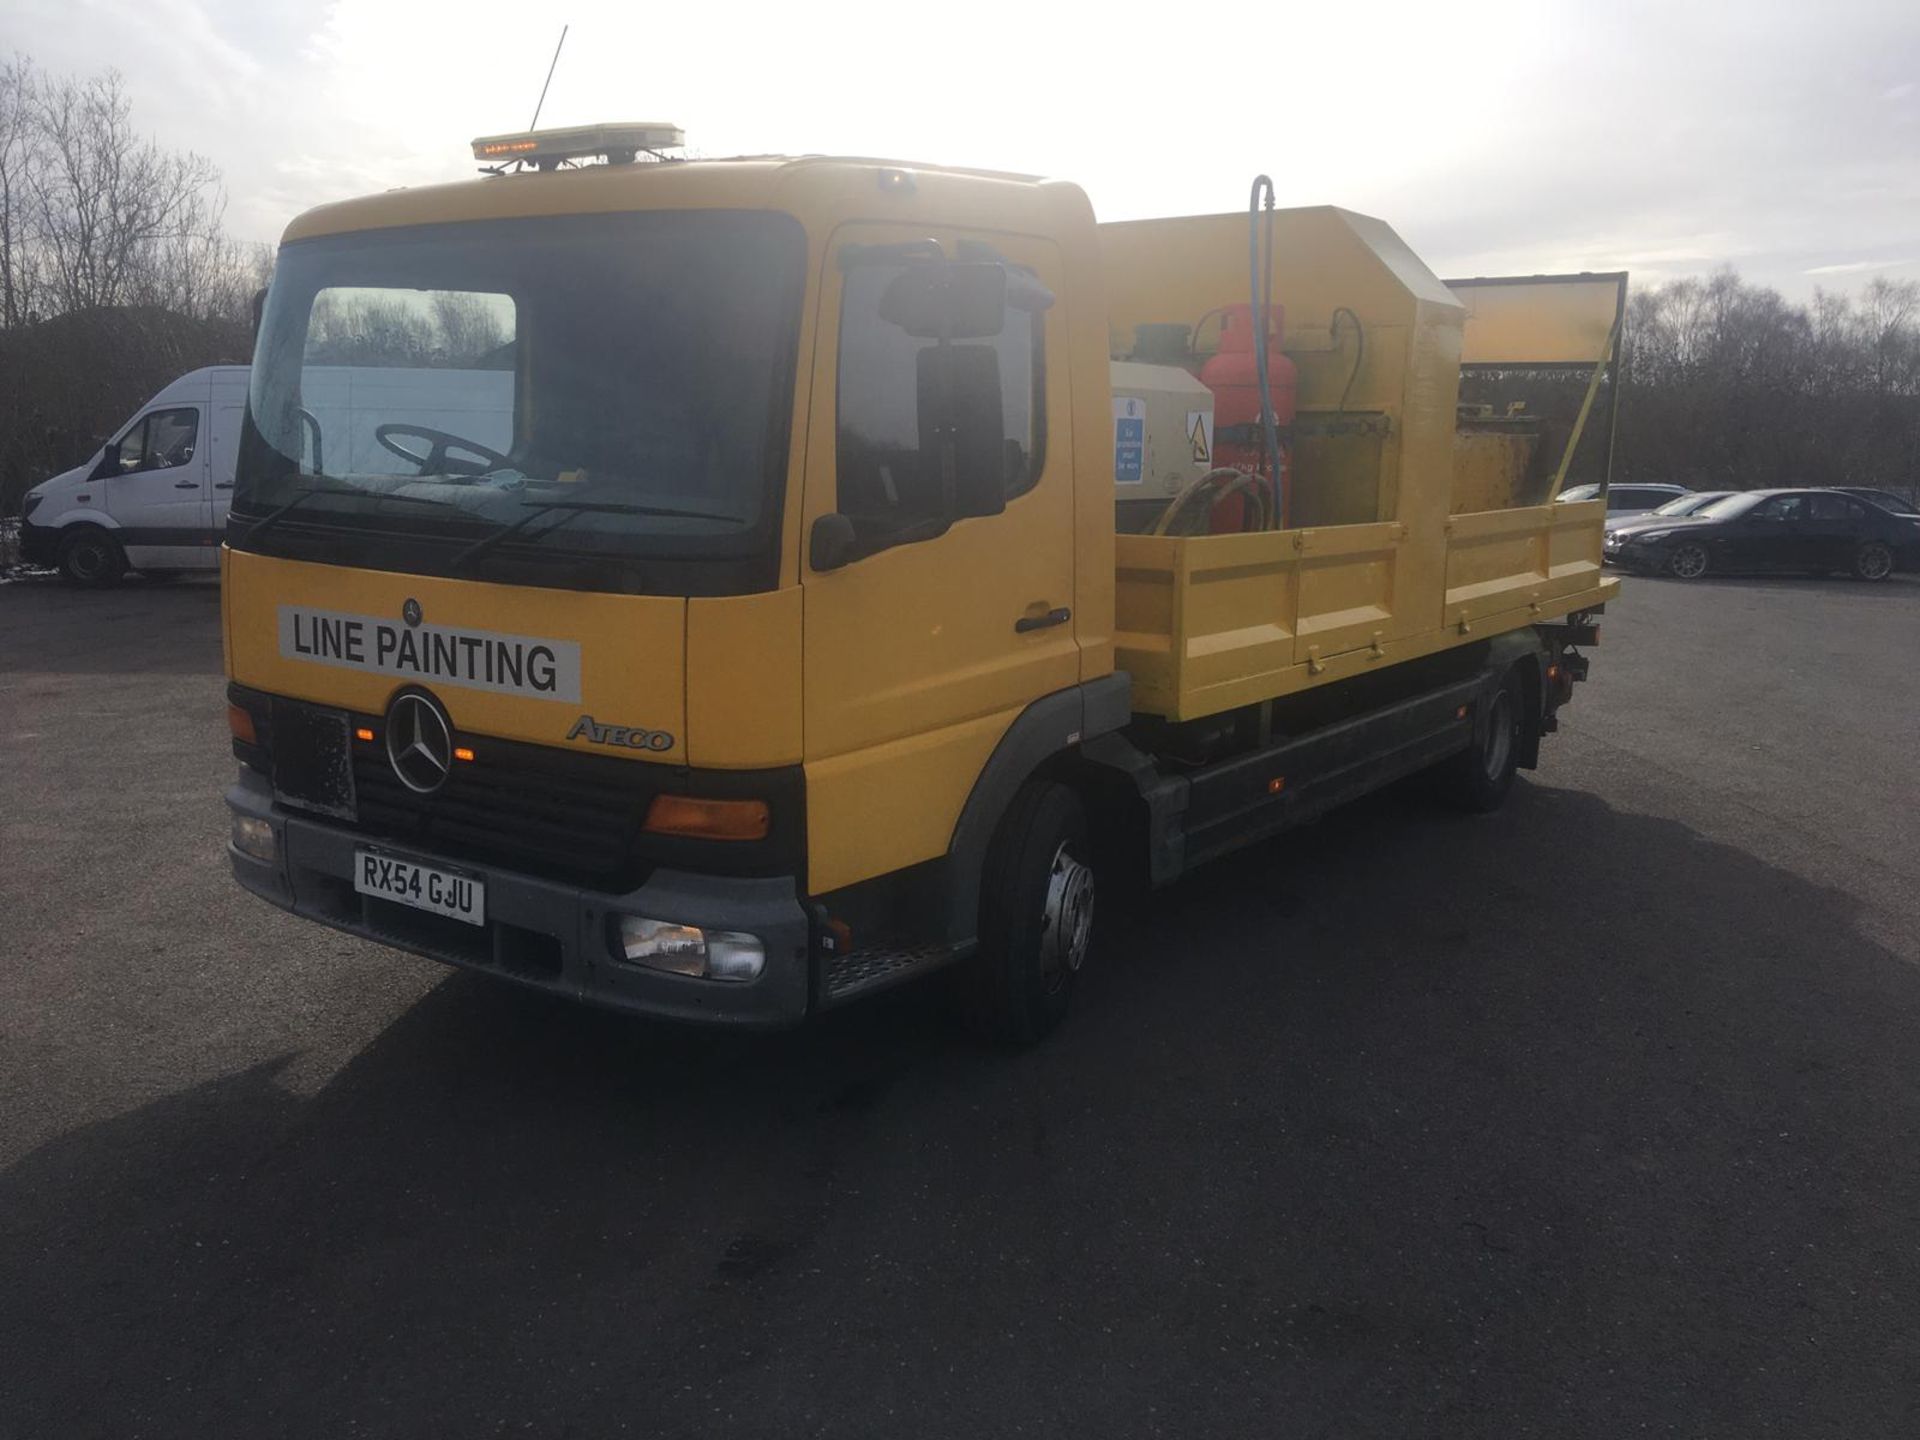 2004/54 REG MERCEDES ATEGO 1018 DAY YELLOW DROPSIDE LINE PAINTING LORRY 4.3L DIESEL ENGINE *NO VAT* - Image 2 of 64